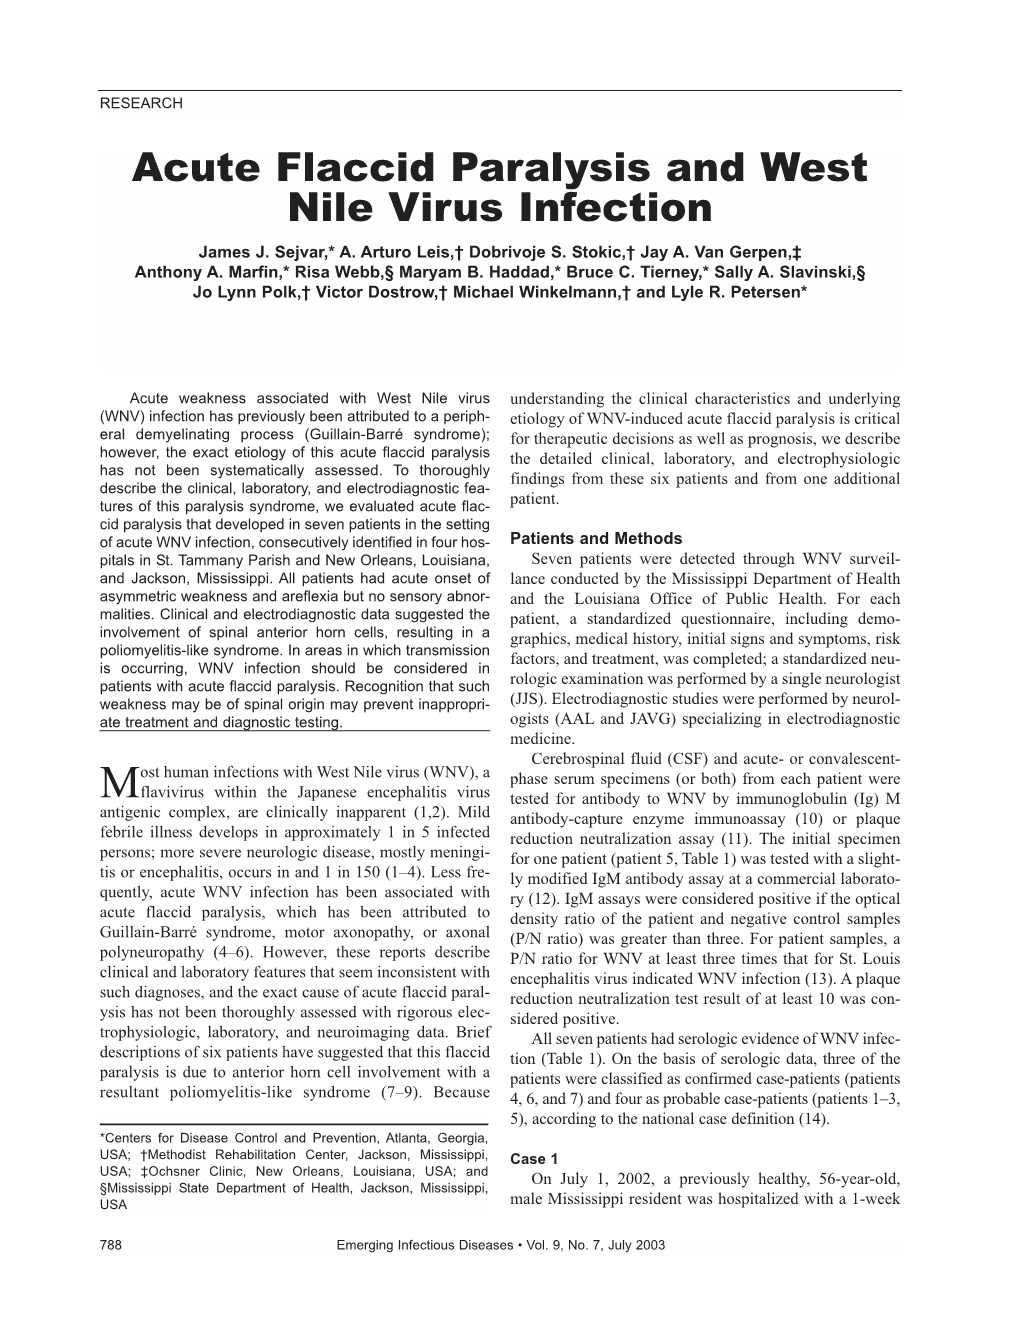 Acute Flaccid Paralysis and West Nile Virus Infection James J